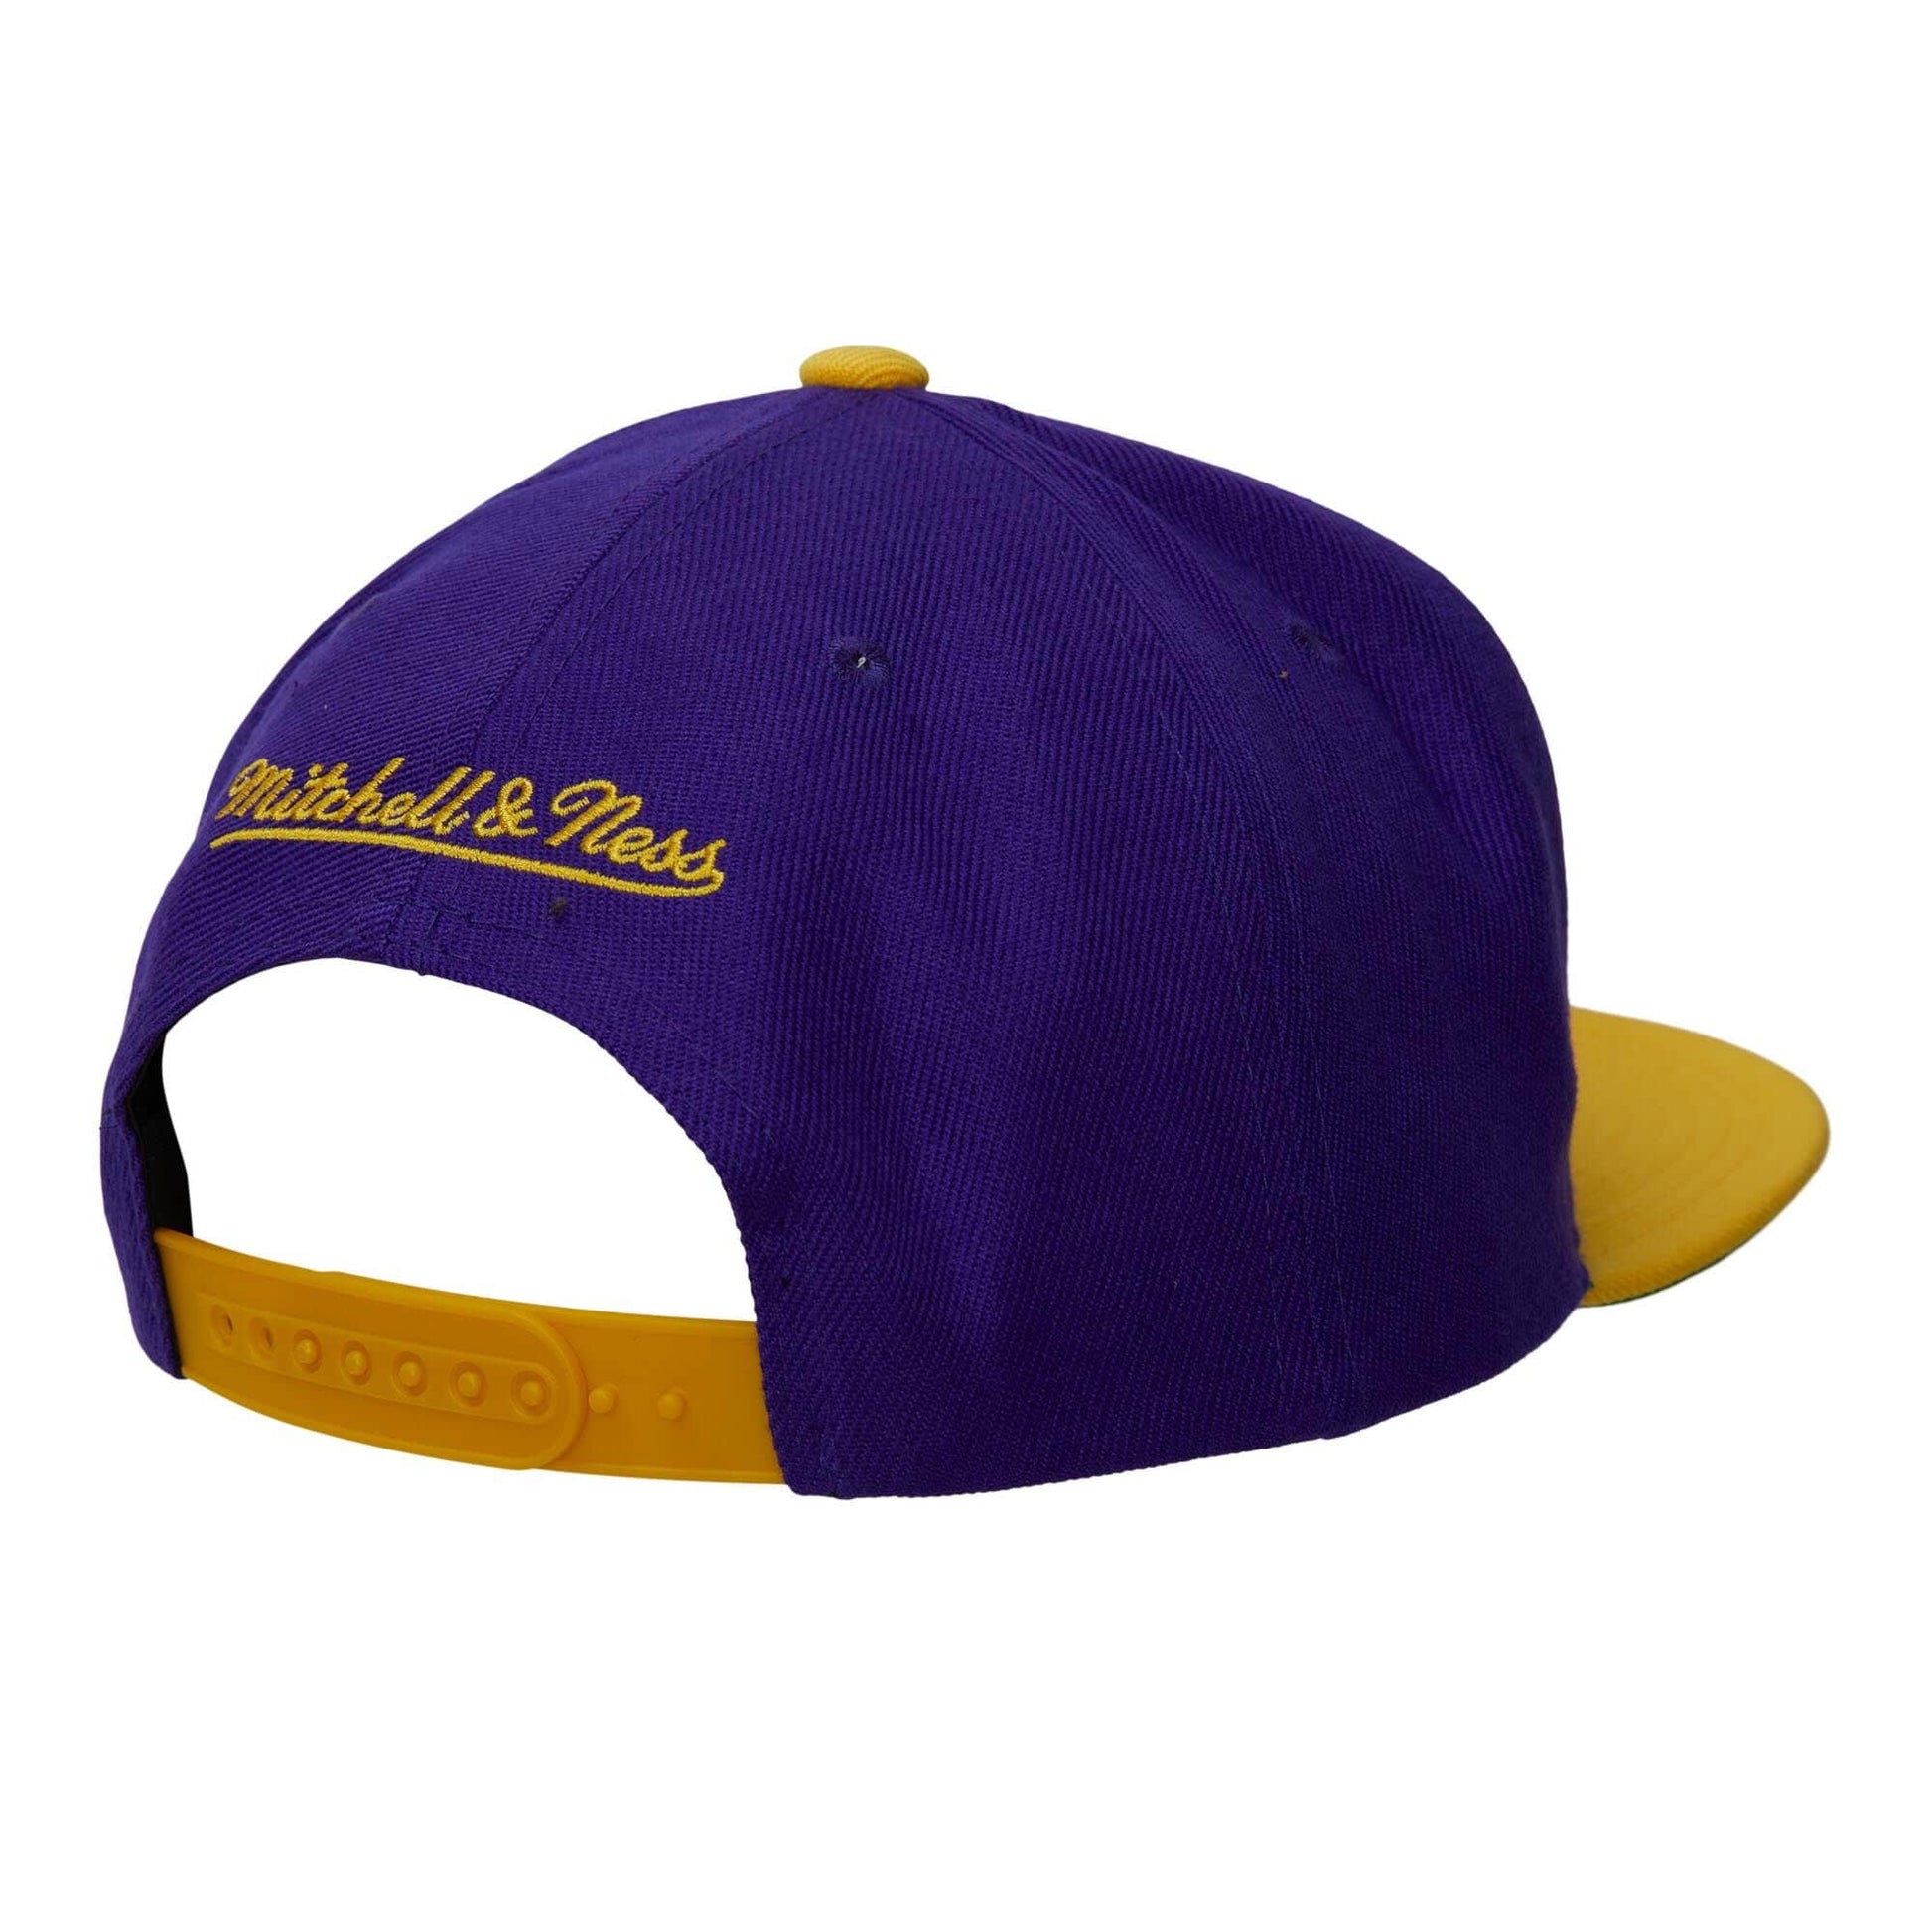 LOS ANGELES LAKERS 2009 FINALS PATCH SNAPBACK – JR'S SPORTS